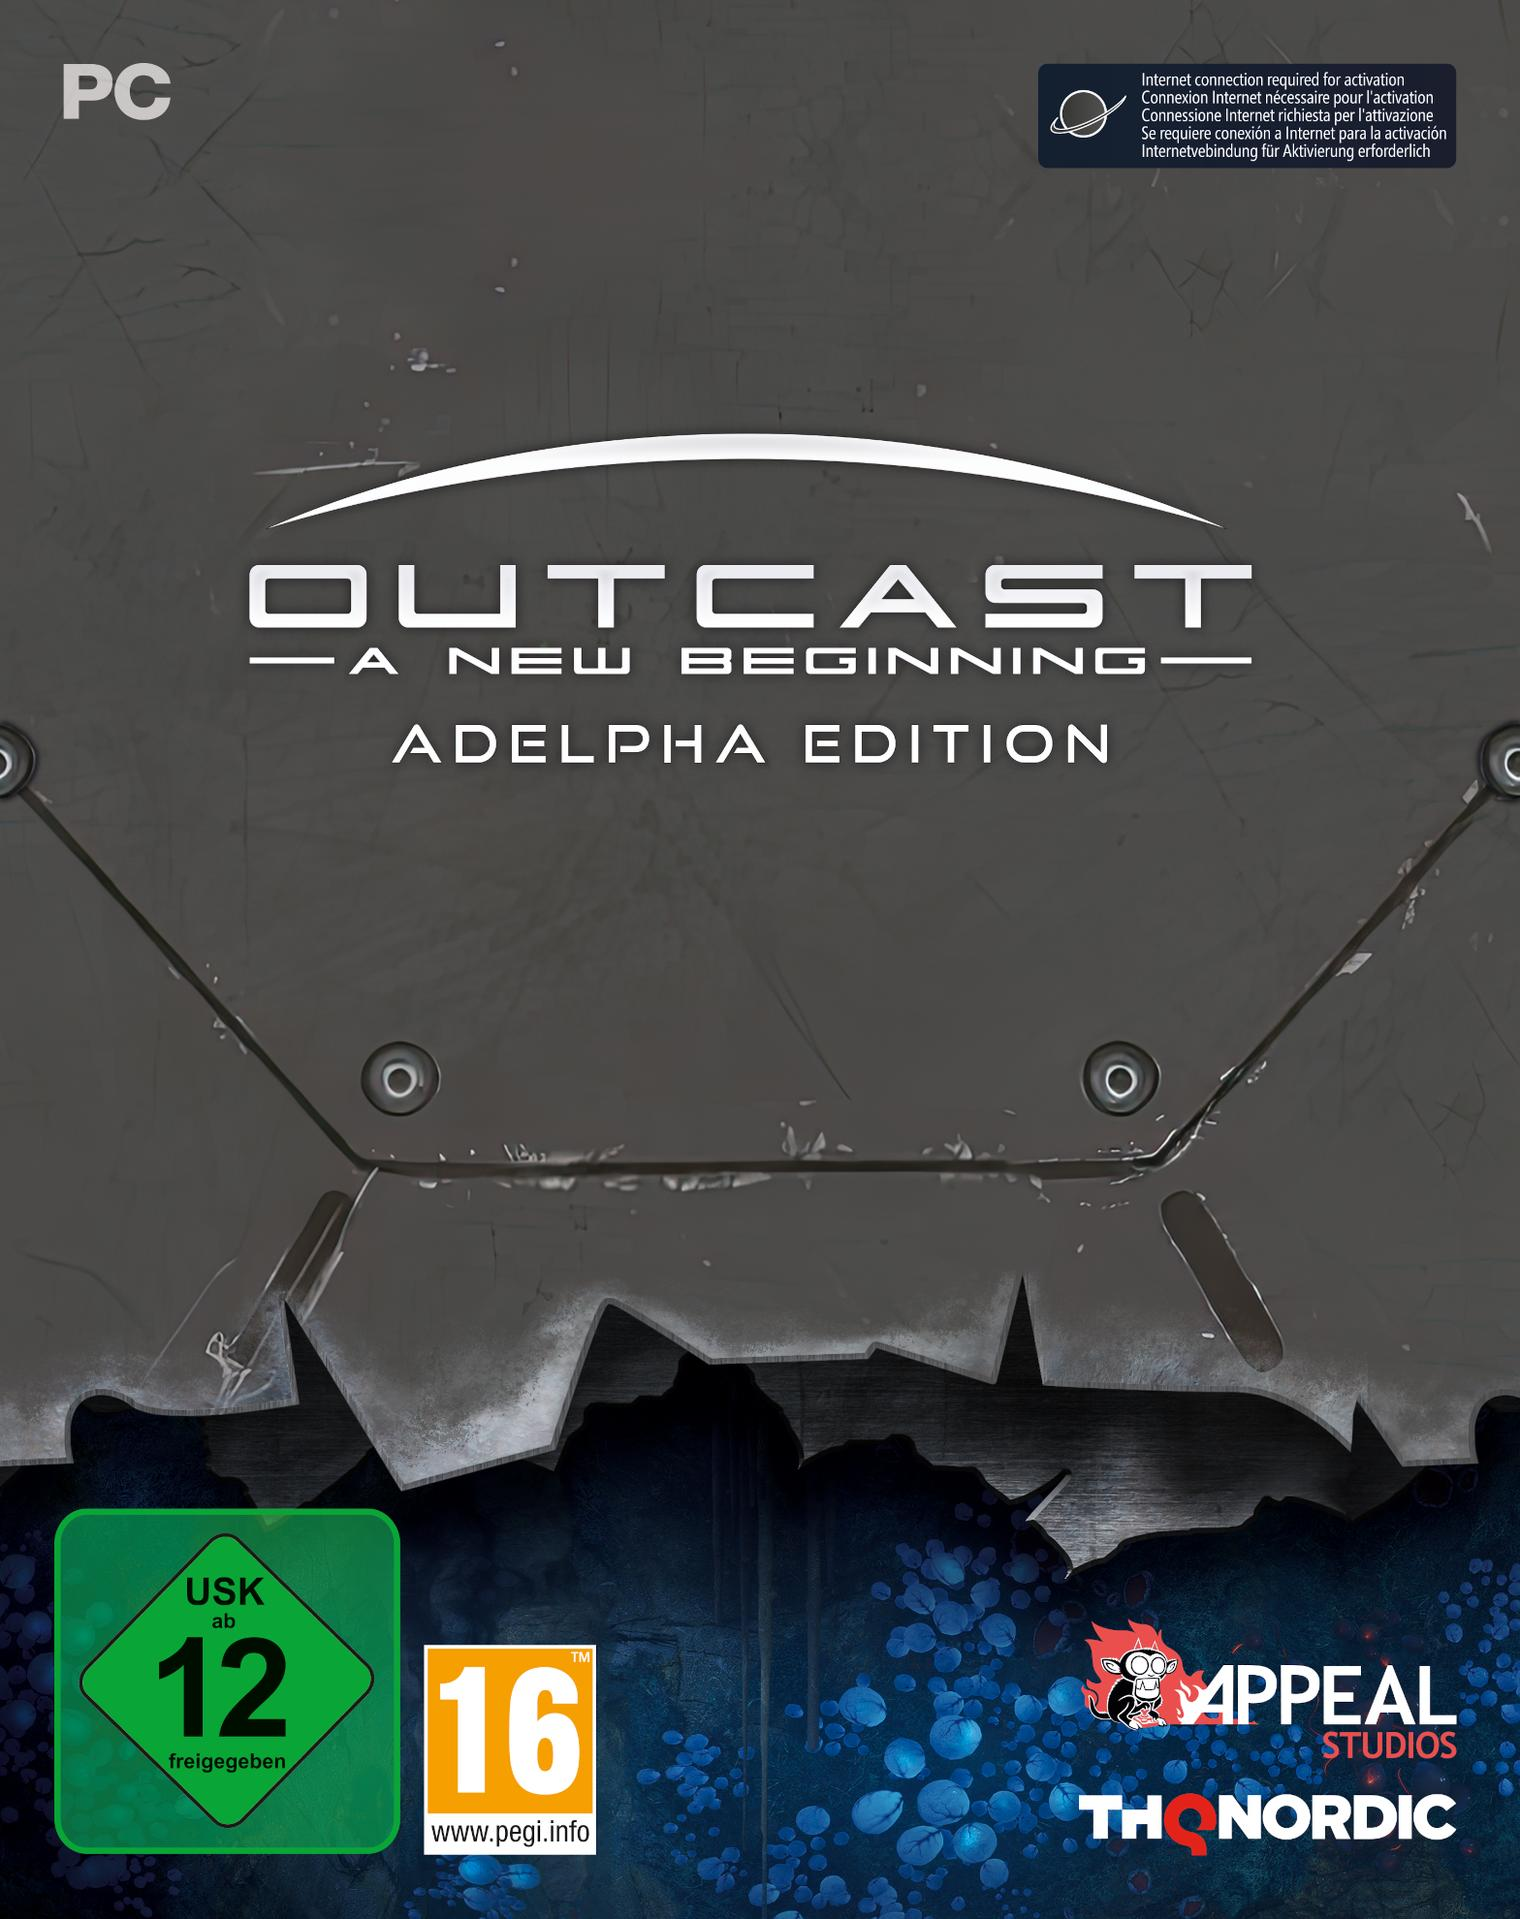 Adelpha A Edition [PC] Beginning - Outcast - New -